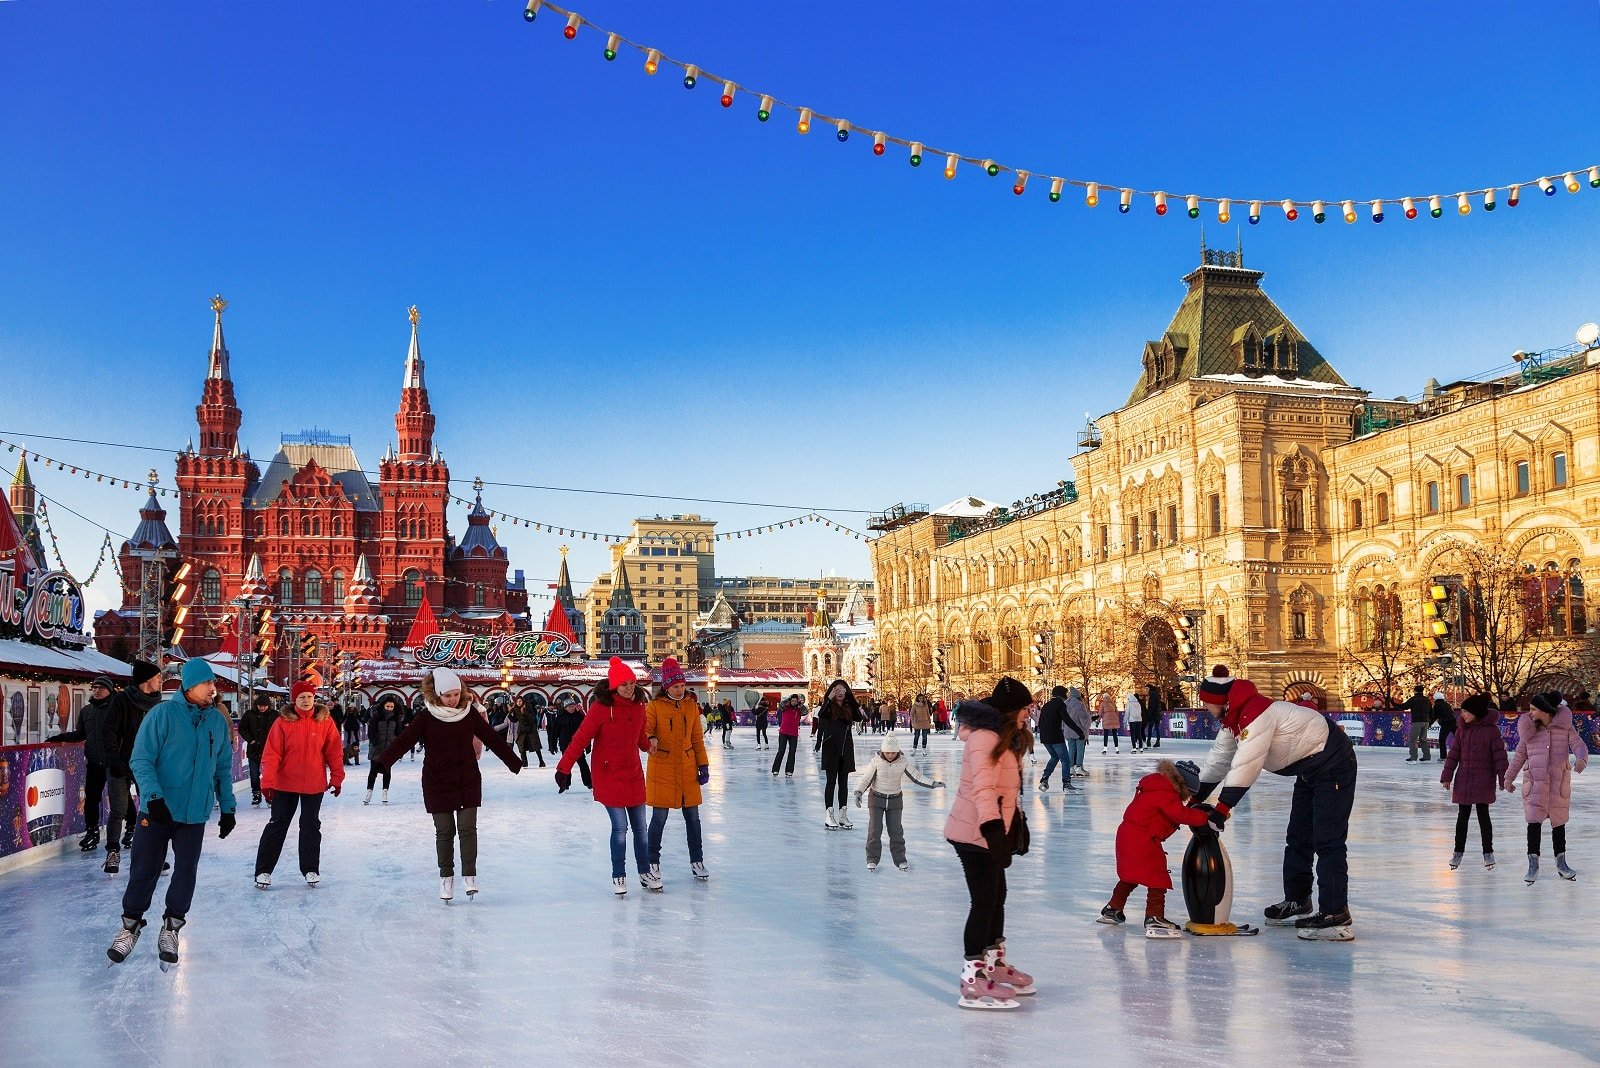 <p><span>The Red Square Rink in Moscow is set in one of Russia’s most historic and iconic locations. Situated beside the Kremlin and St. Basil’s Cathedral, the rink offers a chance to skate in the shadow of these famous landmarks.</span></p> <p><span>The rink is part of the GUM department store’s winter market, which includes festive stalls and decorations. Skating at the Red Square Rink is an immersion in Russian history and culture set against the backdrop of Moscow’s winter landscape. </span></p> <p><b>Insider’s Tip: </b><span>Visit the GUM market for traditional Russian winter snacks and souvenirs. </span></p> <p><b>When to Travel: </b><span>November to February for the winter season. </span></p> <p><b>How to Get There: </b><span>Fly to Moscow Sheremetyevo International Airport and travel to Red Square.</span></p>